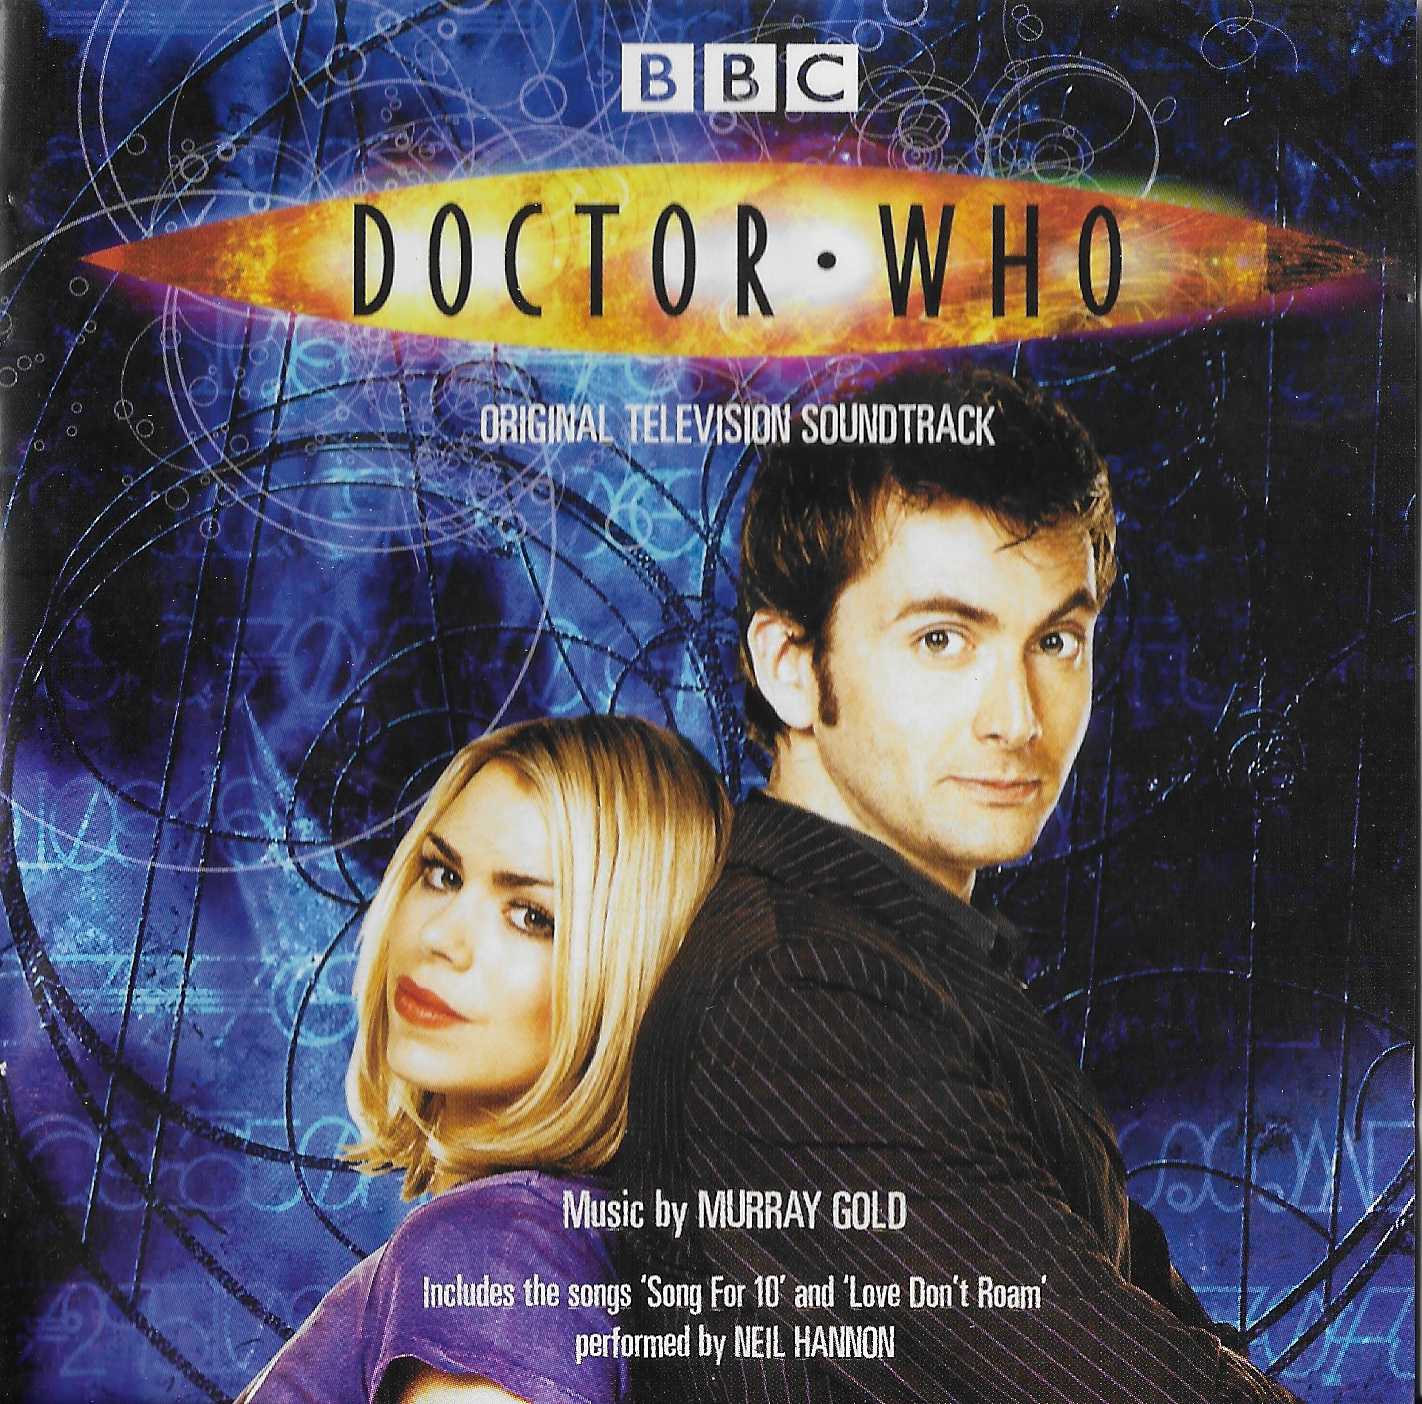 Picture of Doctor Who - Original television soundtrack by artist Murray Gold from the BBC cds - Records and Tapes library